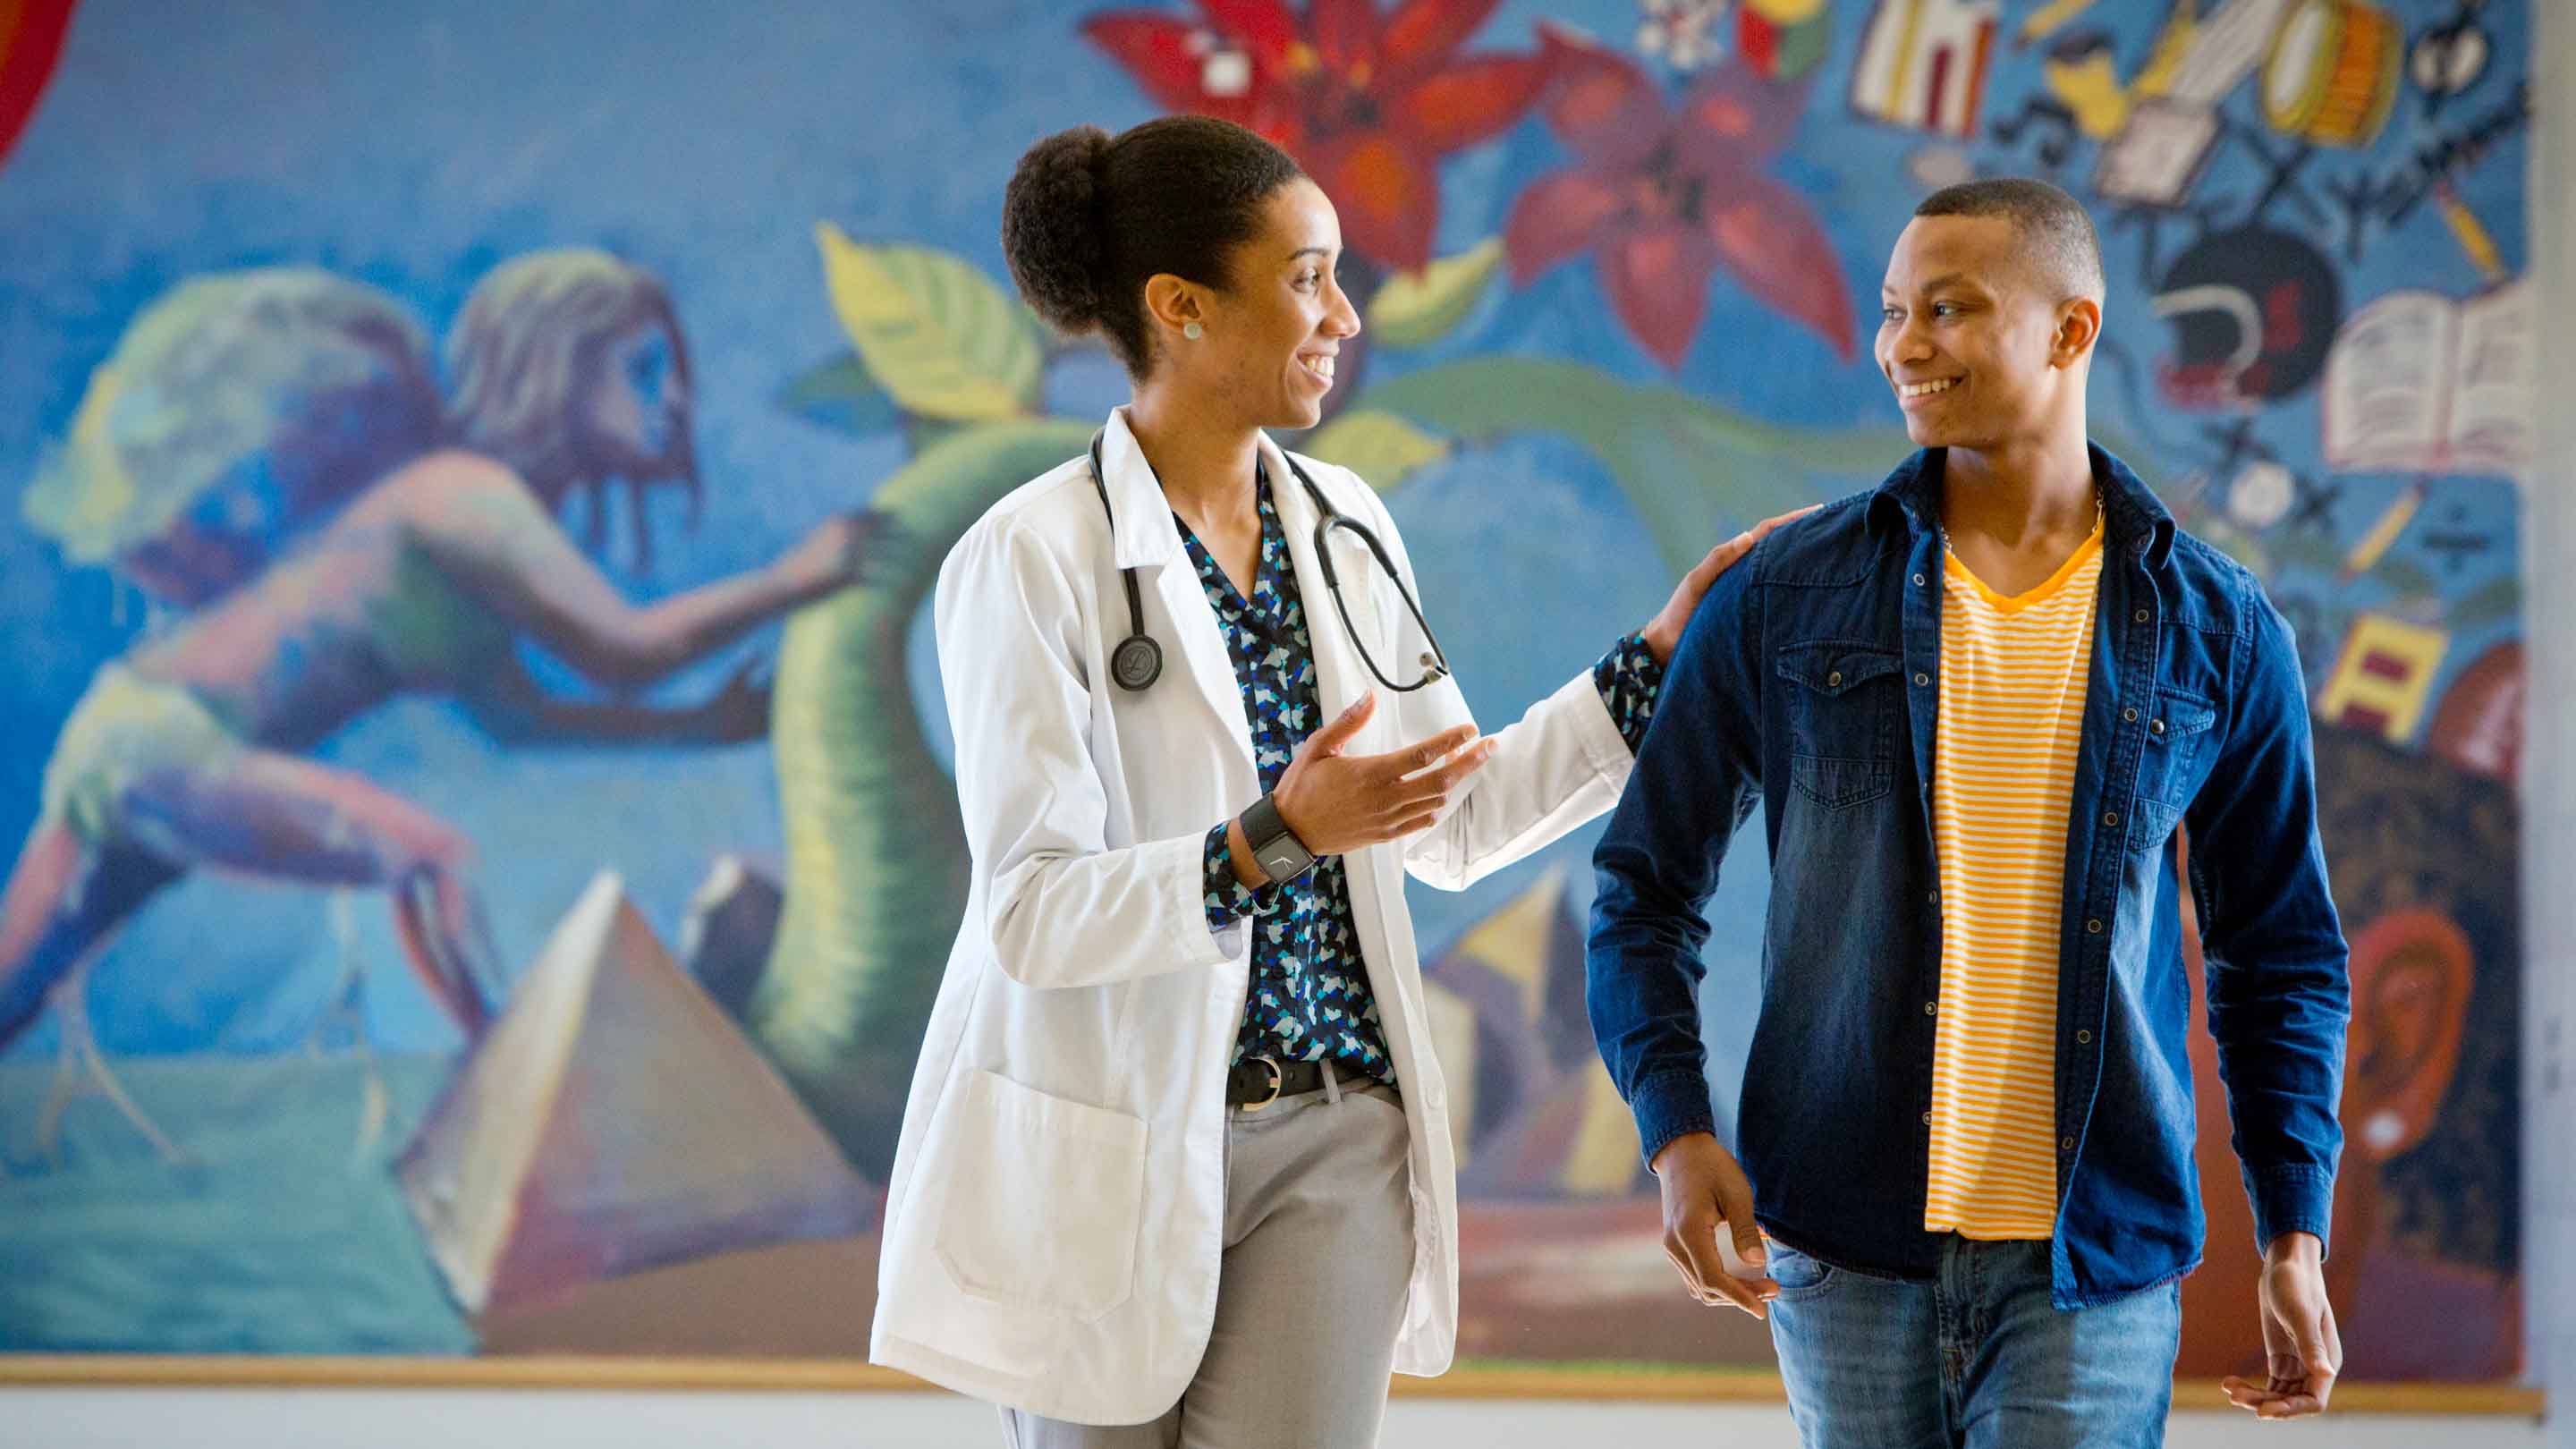 A doctor an patient joyfully talking in front of a colorful mural.